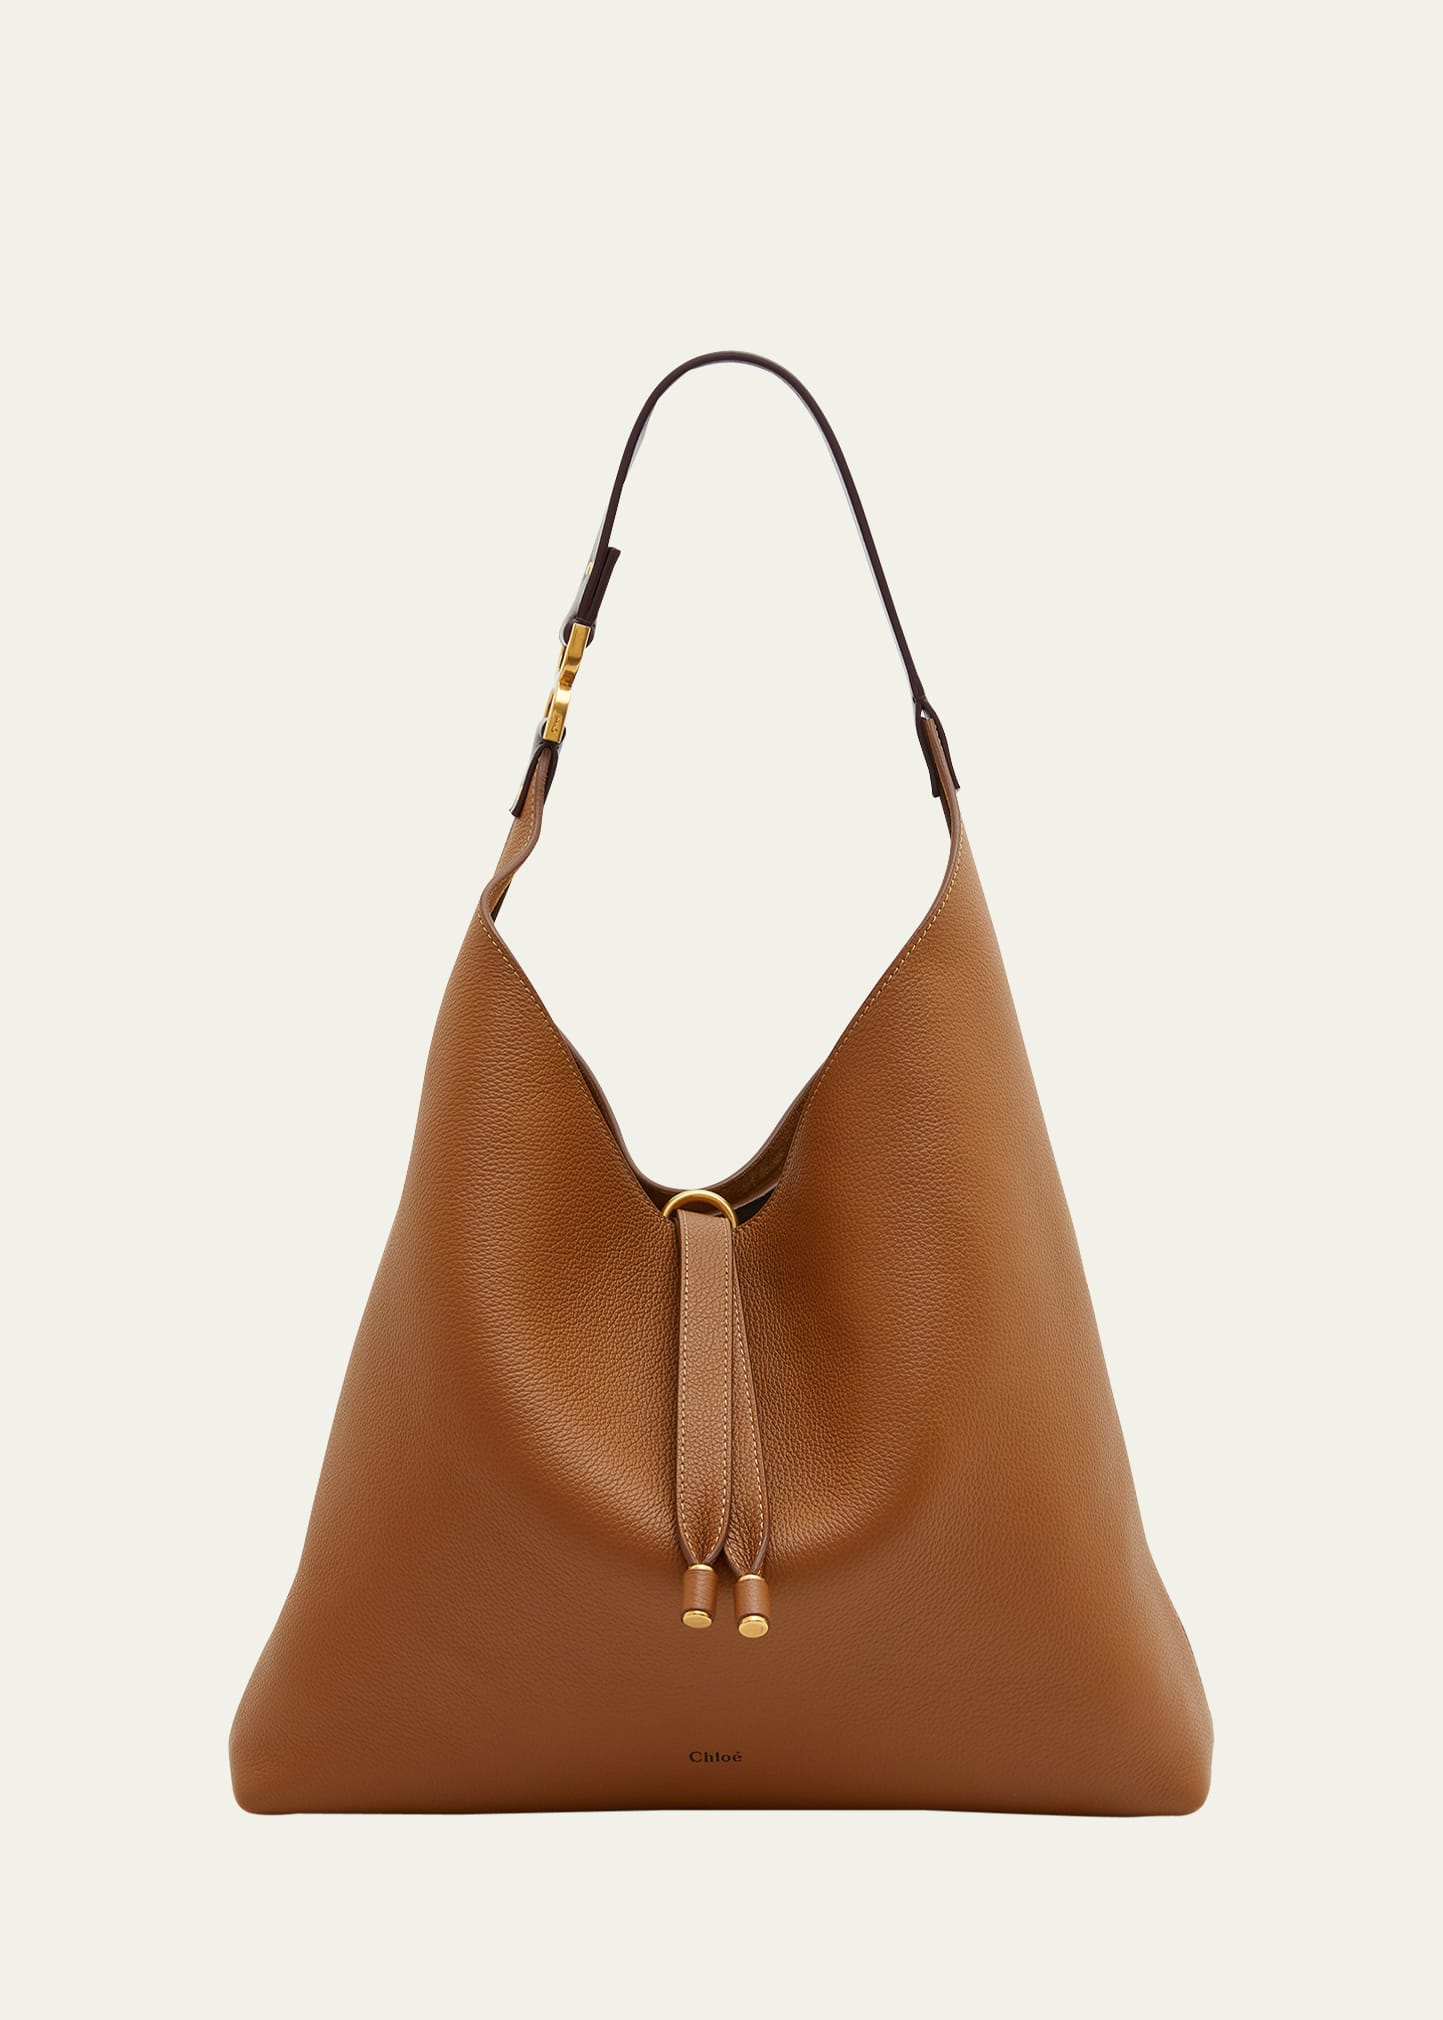 Chloé Marcie Grained Leather Hobo Bag In 207 Pottery Brown